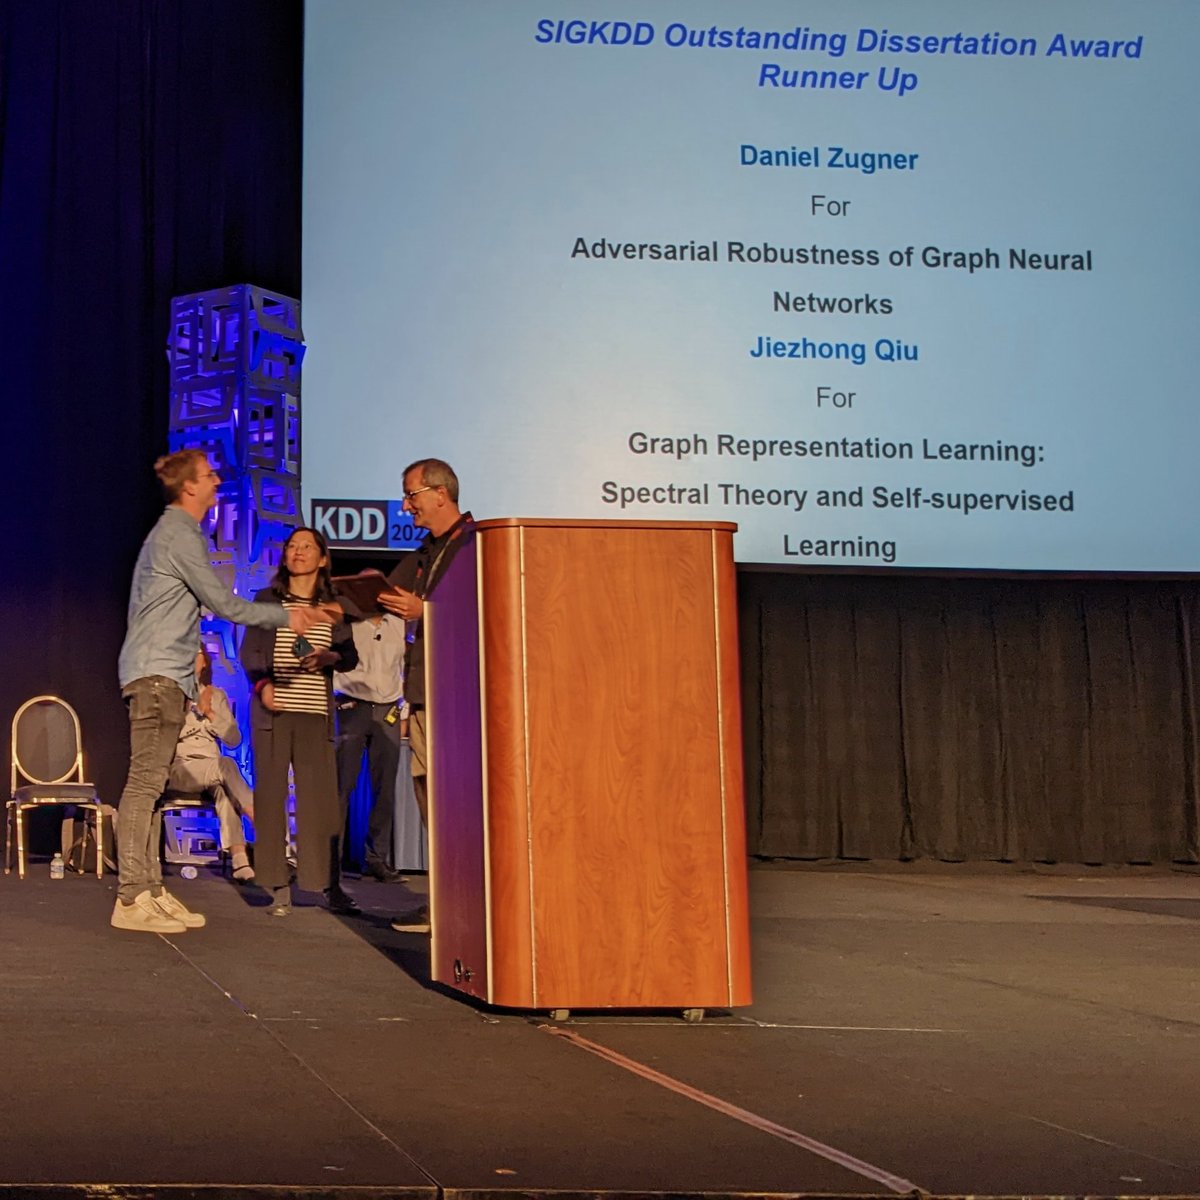 Beyond excited that my thesis 'Adversarial Robustness of Graph Neural Networks' was selected as runner up for the #KDD2022 Outstanding Dissertation Award. 

Huge thanks to all collaborators and my supervisor @guennemann, and to everyone who made this possible.